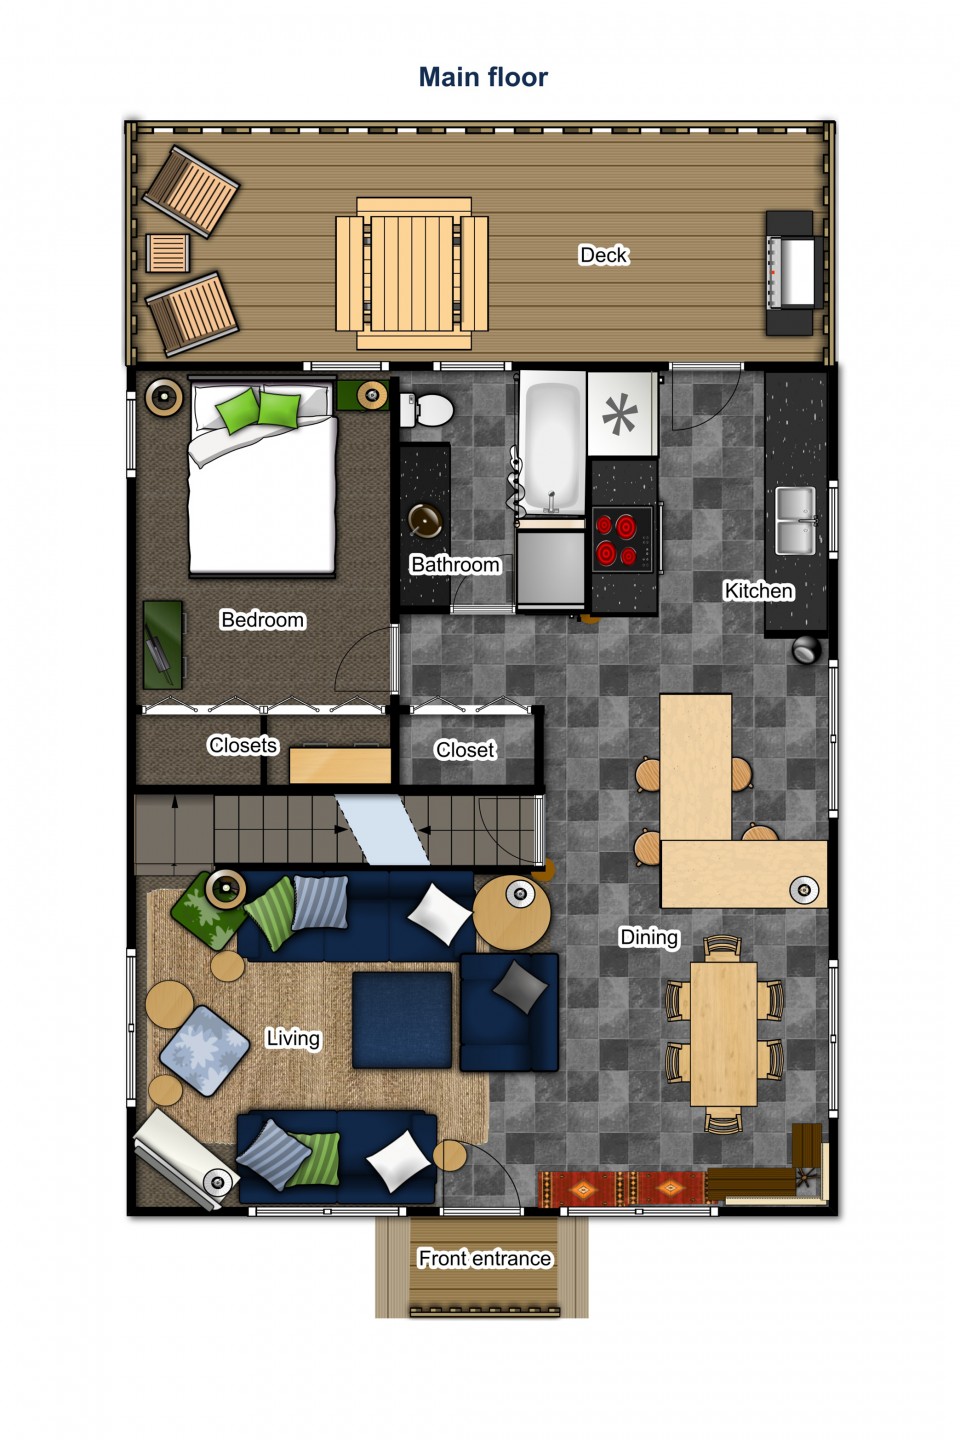 Main floor — front entry, living room, dining, kitchen, bedroom, bathroom and deck